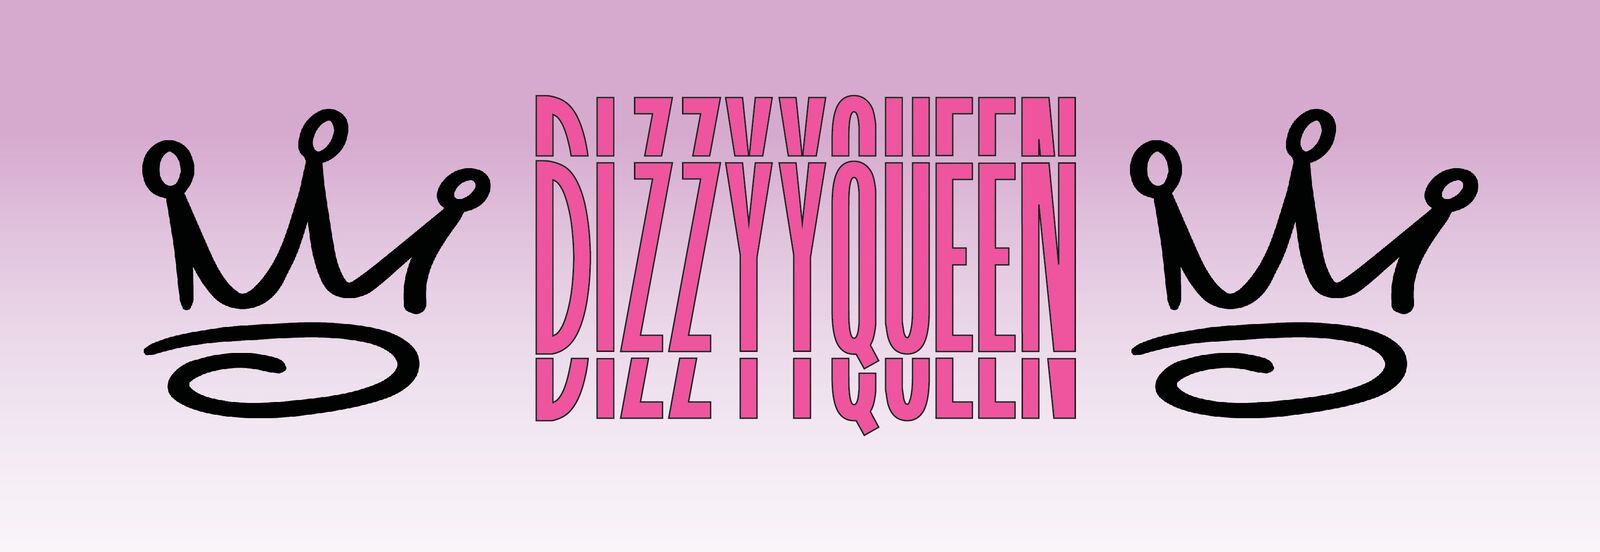 See Dizzy Queen™ profile